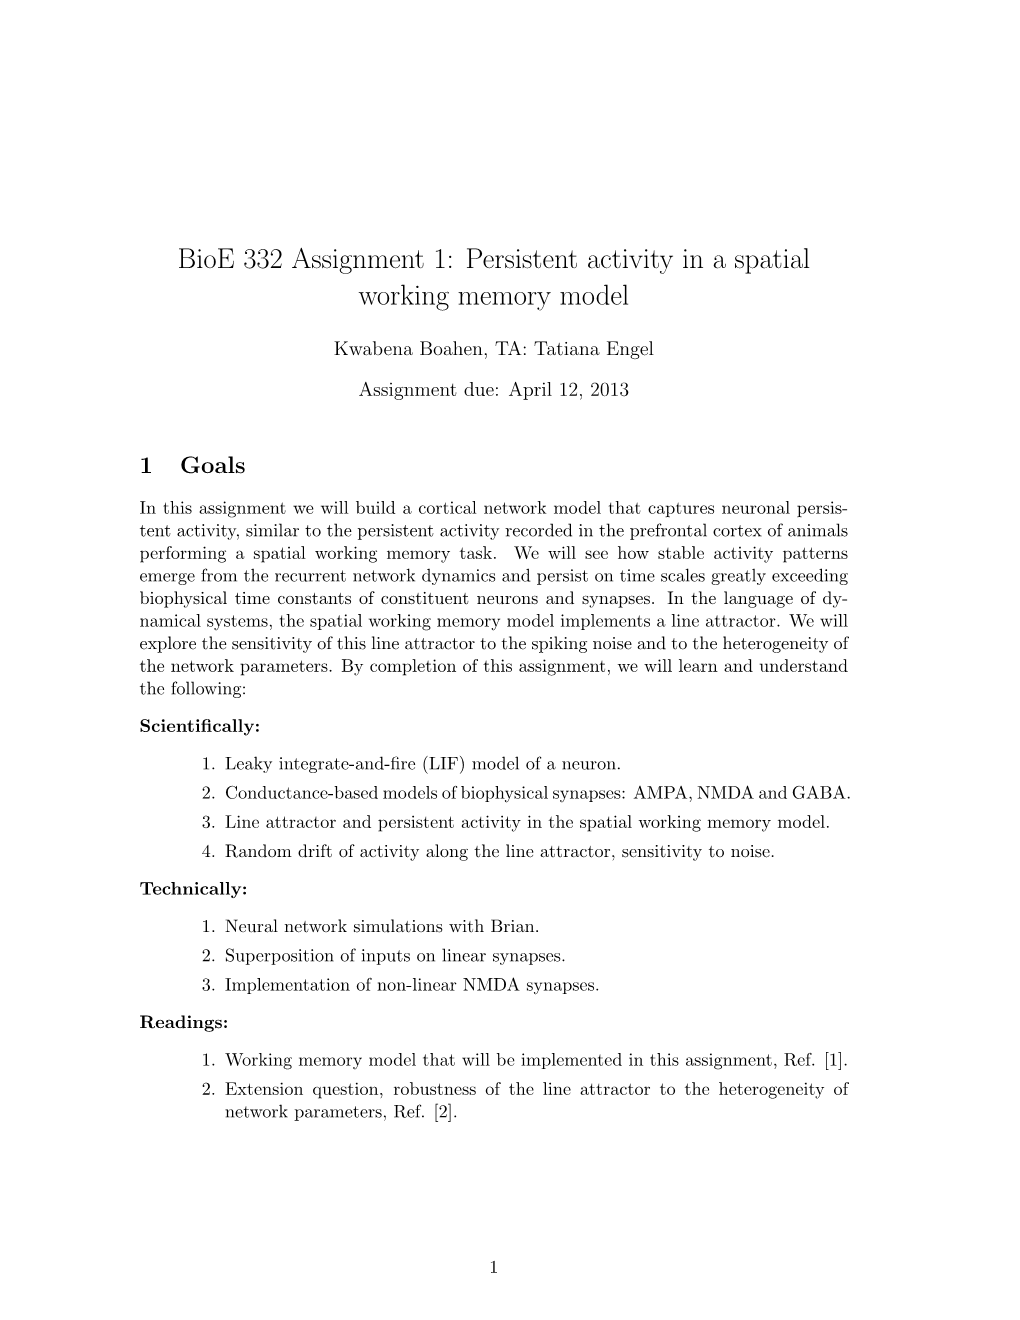 Bioe 332 Assignment 1: Persistent Activity in a Spatial Working Memory Model